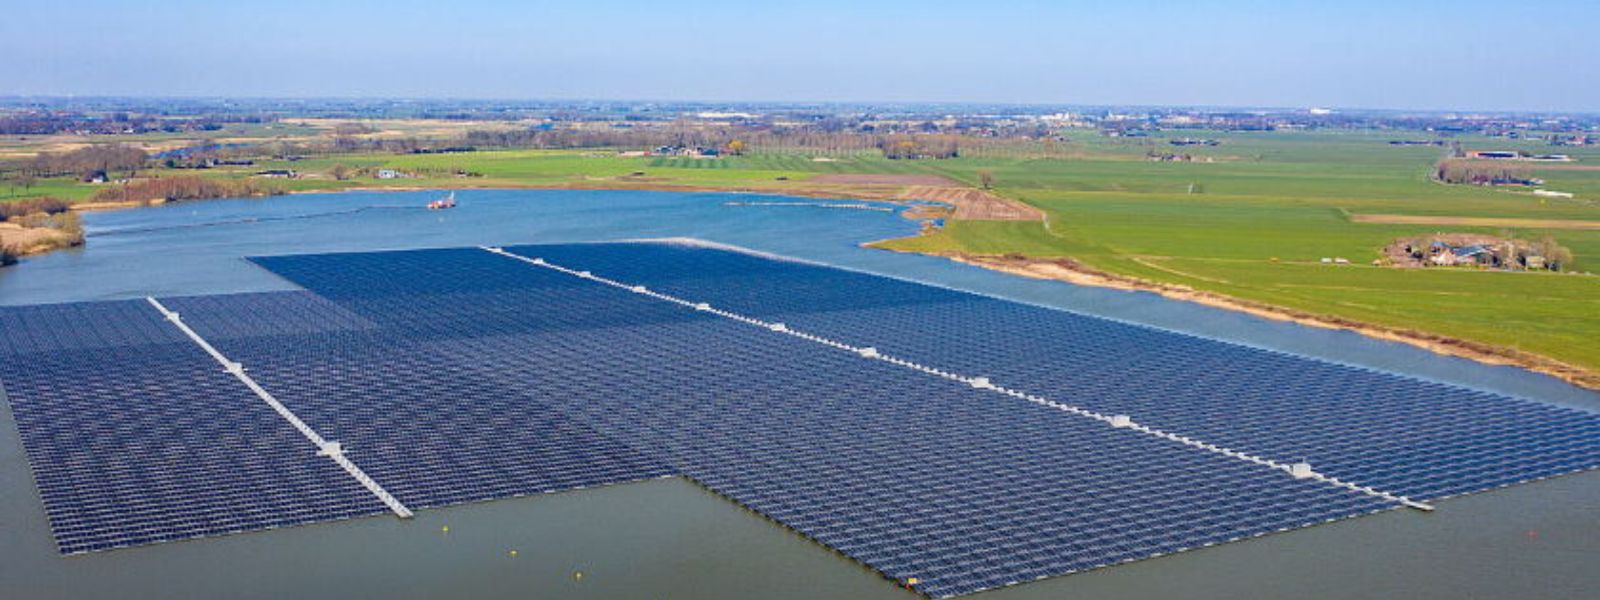 South Korea provides a grant of US$ 5.2 million to construct Sri Lanka’s first floating Solar power plant